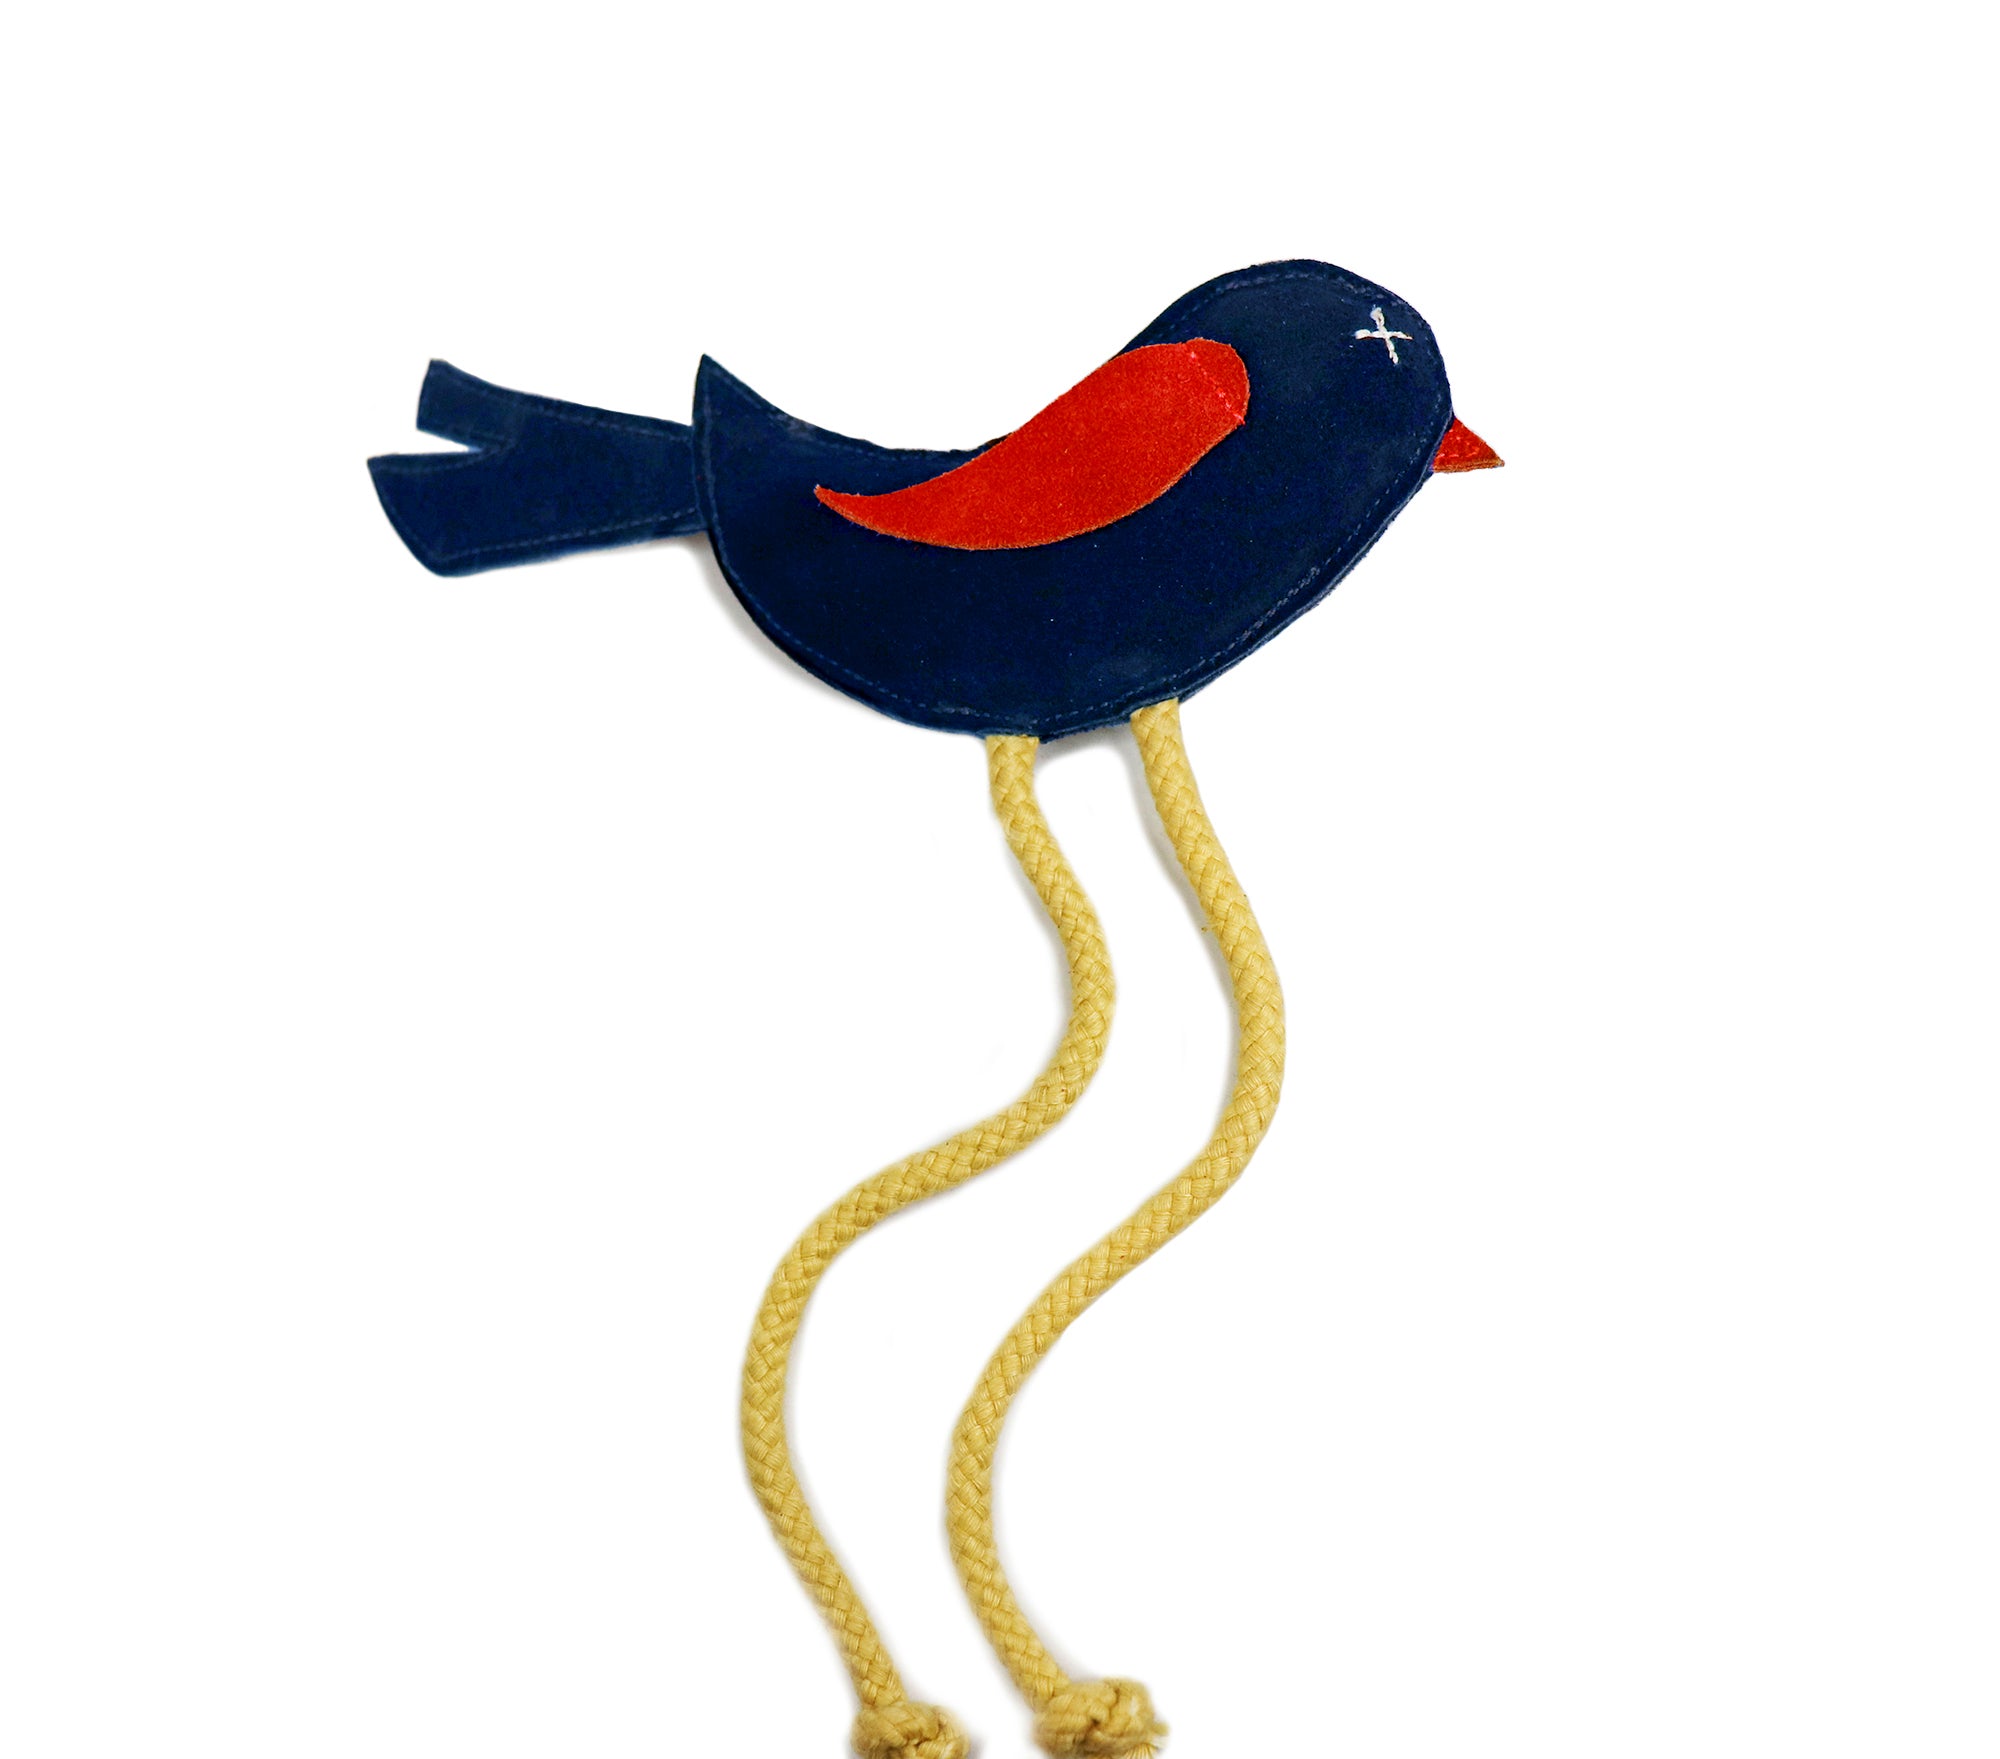 A whimsical Birdy Toy - Travis brooch with blue body, red wing, eye detail, and stylized yellow braided legs designed for small dogs against a white background by Georgie Paws.